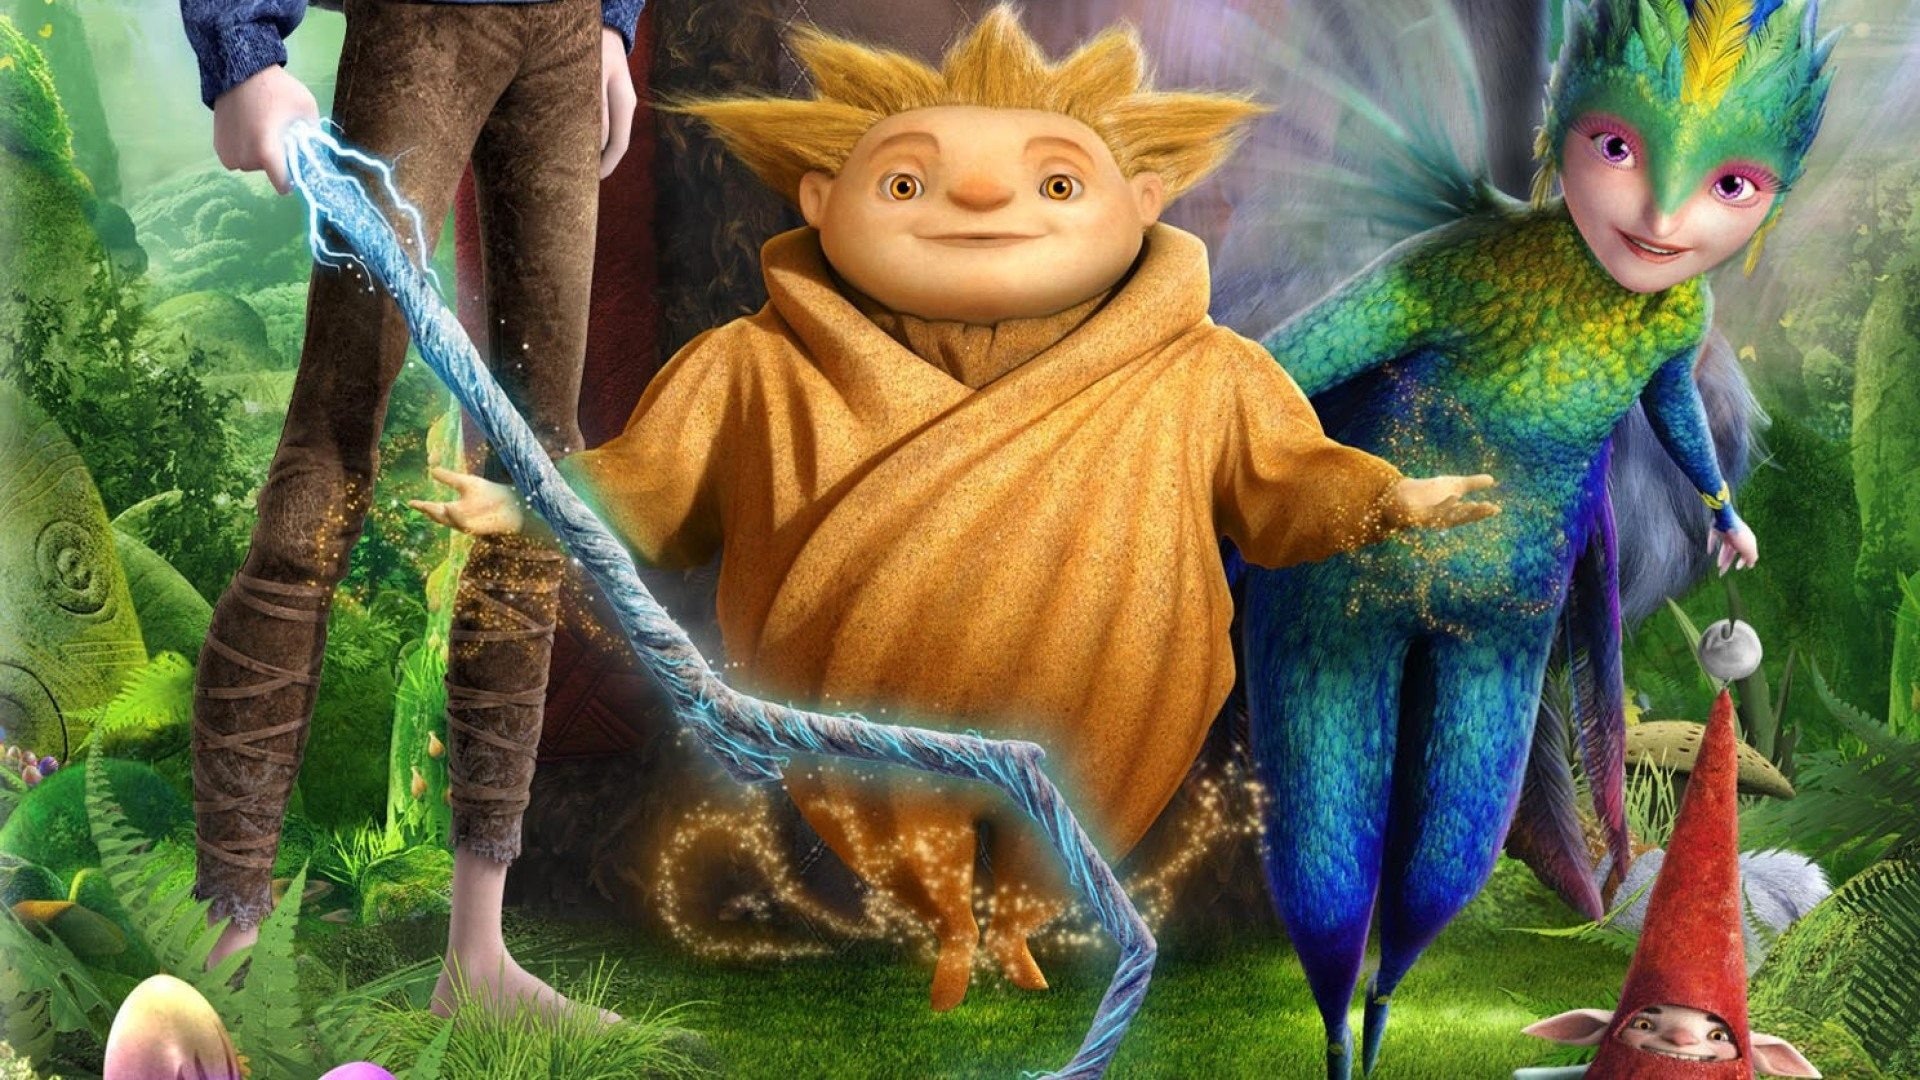 Rise of the Guardians streaming: where to watch online?